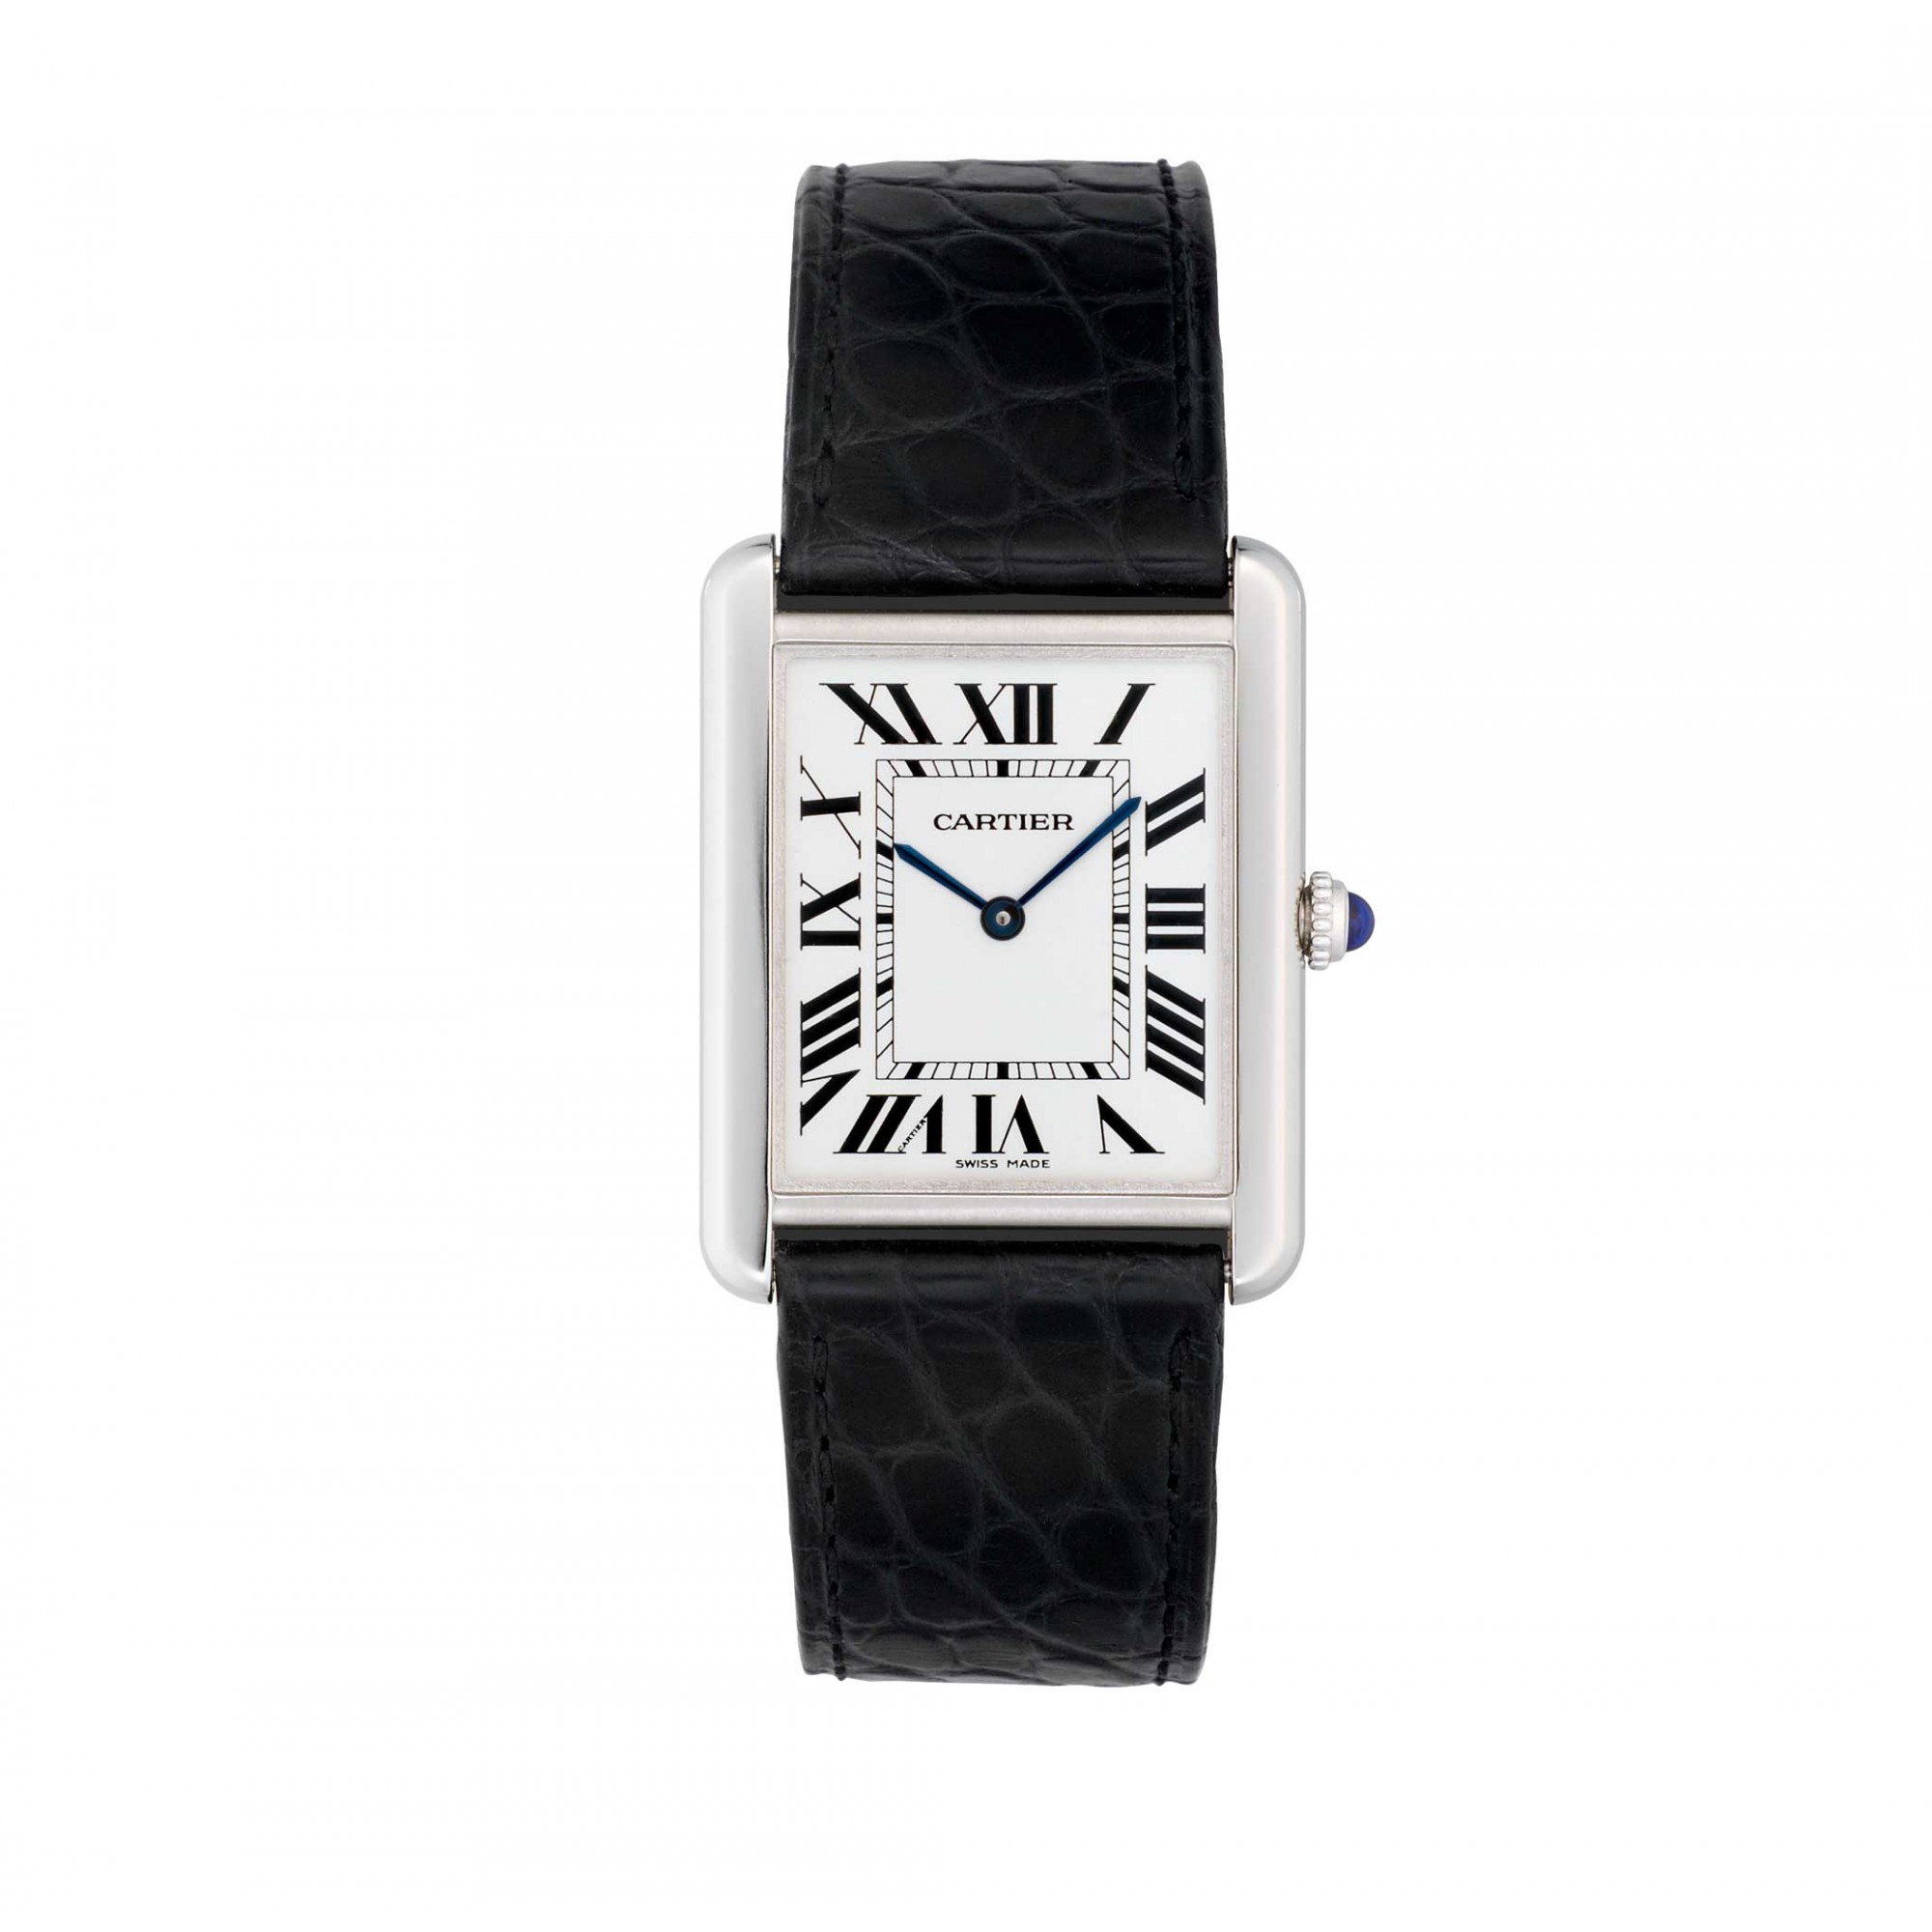 Amazing Cartier Tank Replica Watch Bulit To The Same Strict Standards ...